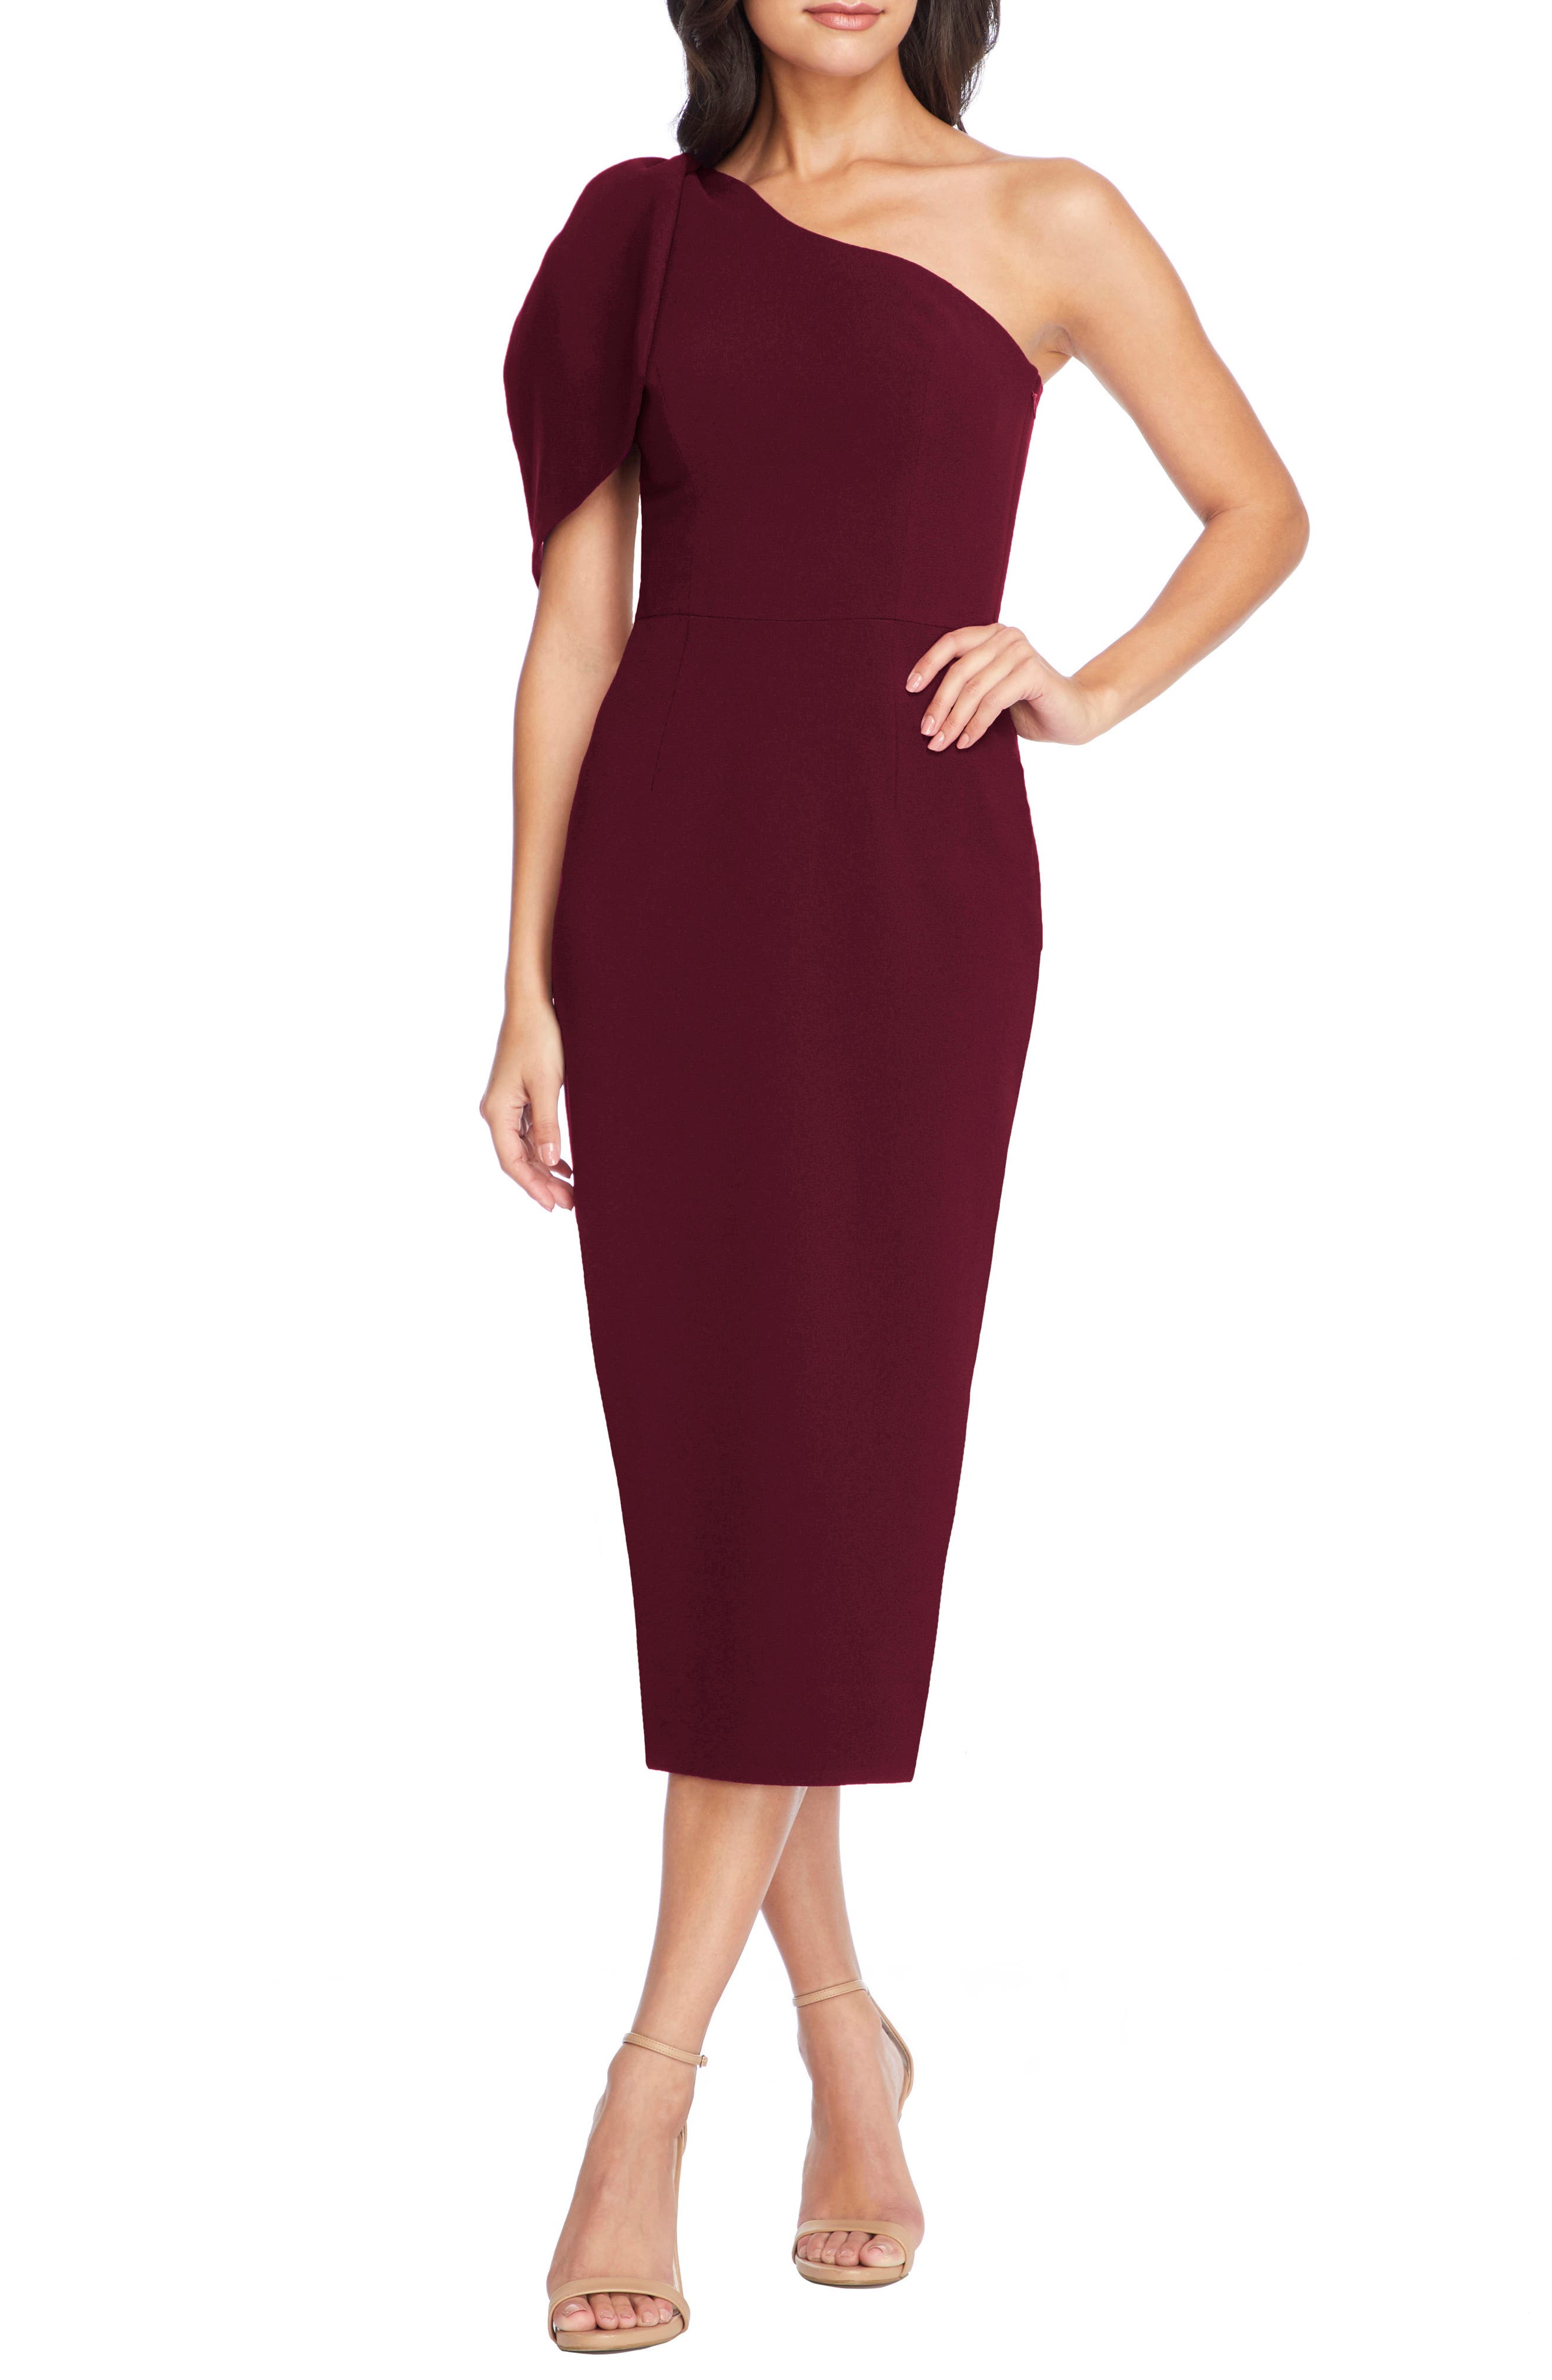 burgundy wedding guest outfit